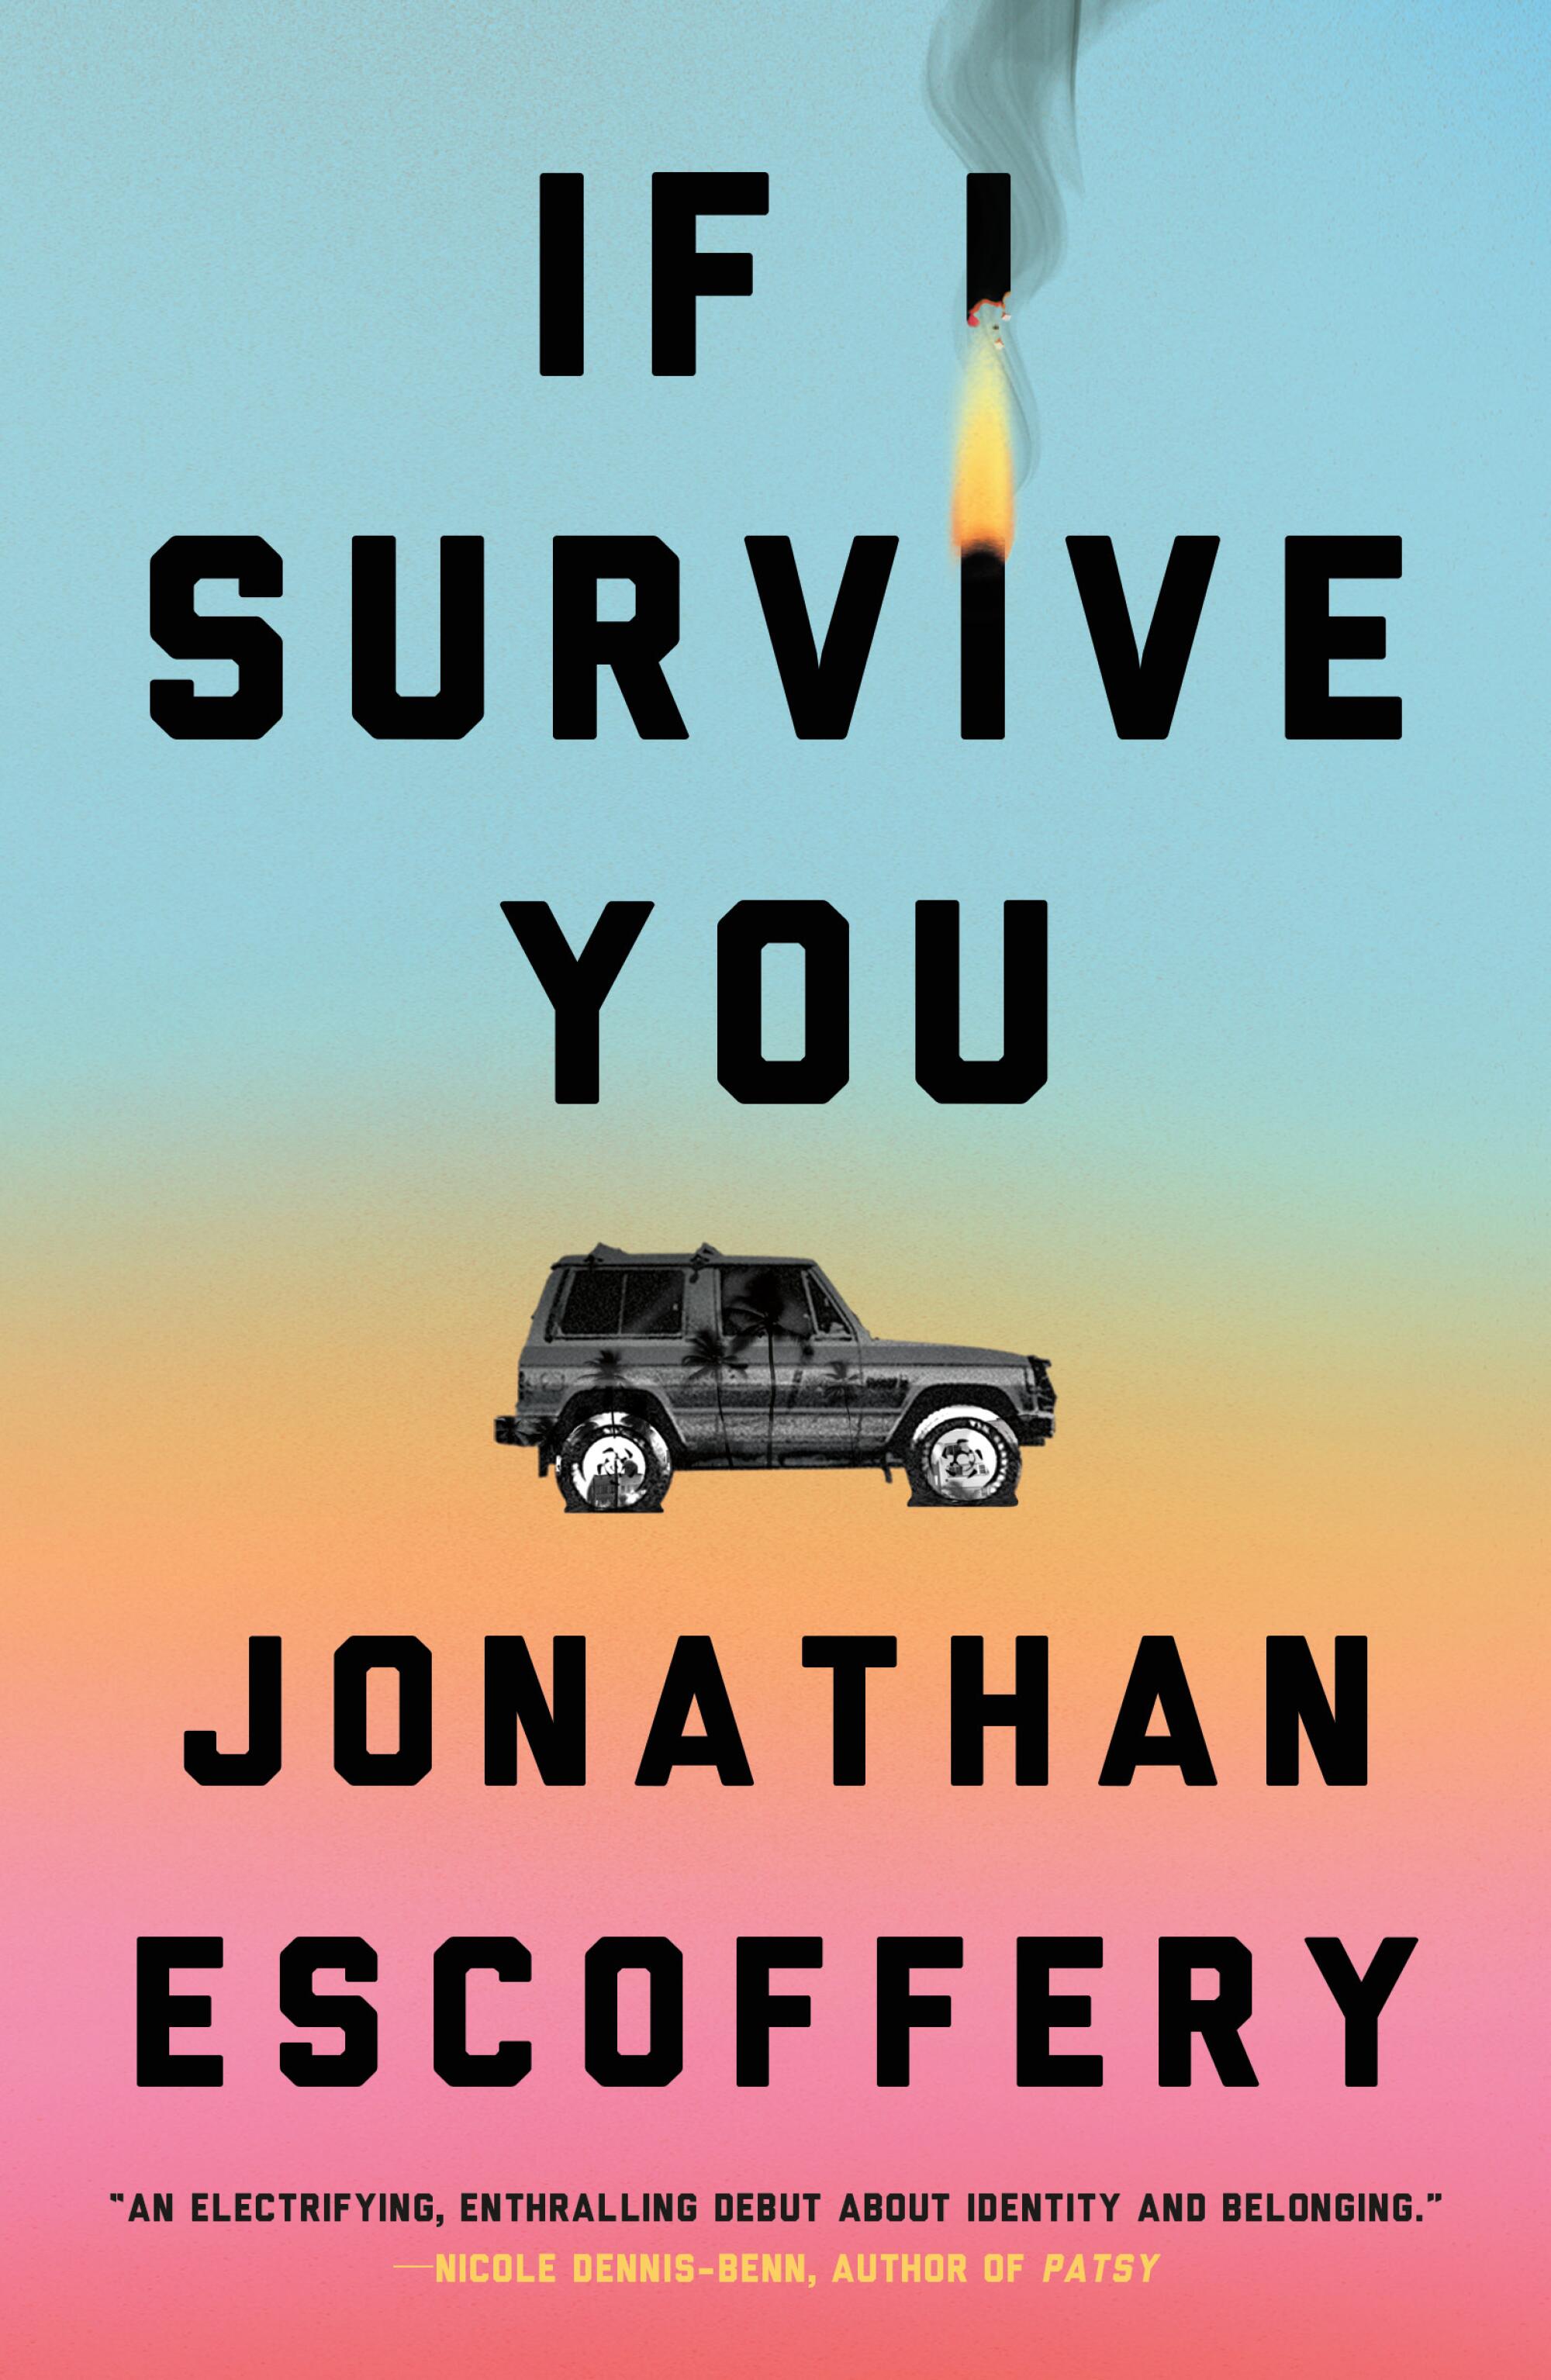 "If I Survive You" by Jonathan Escoffery